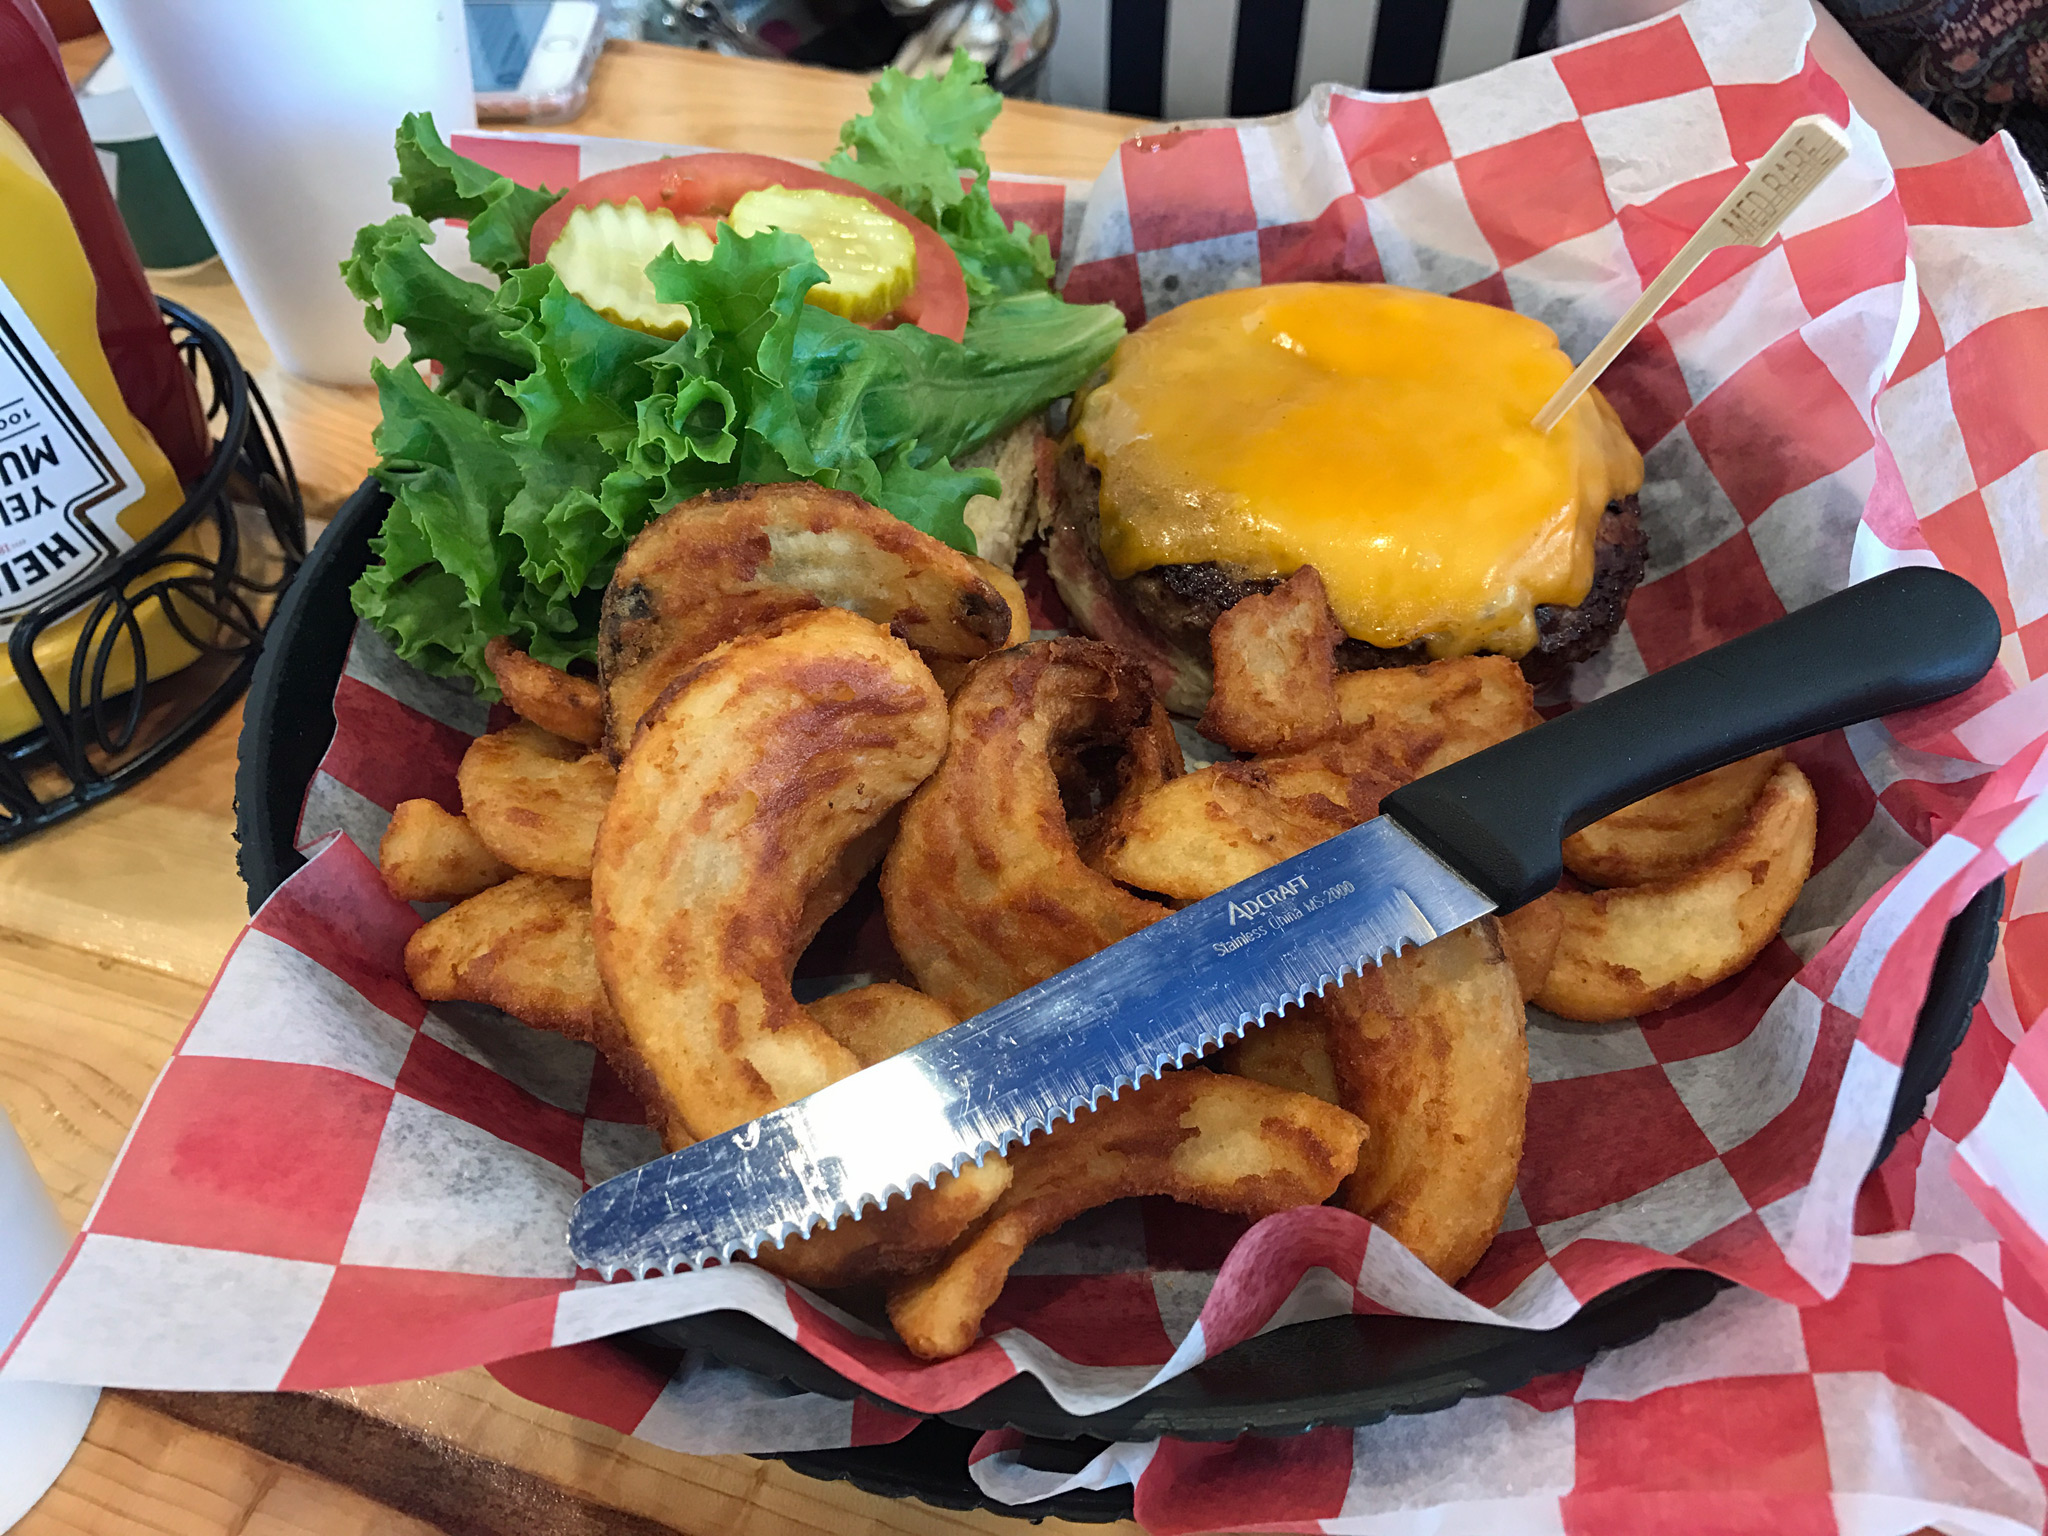 The Blvd Burger with Beer Battered Sidewinder Fries